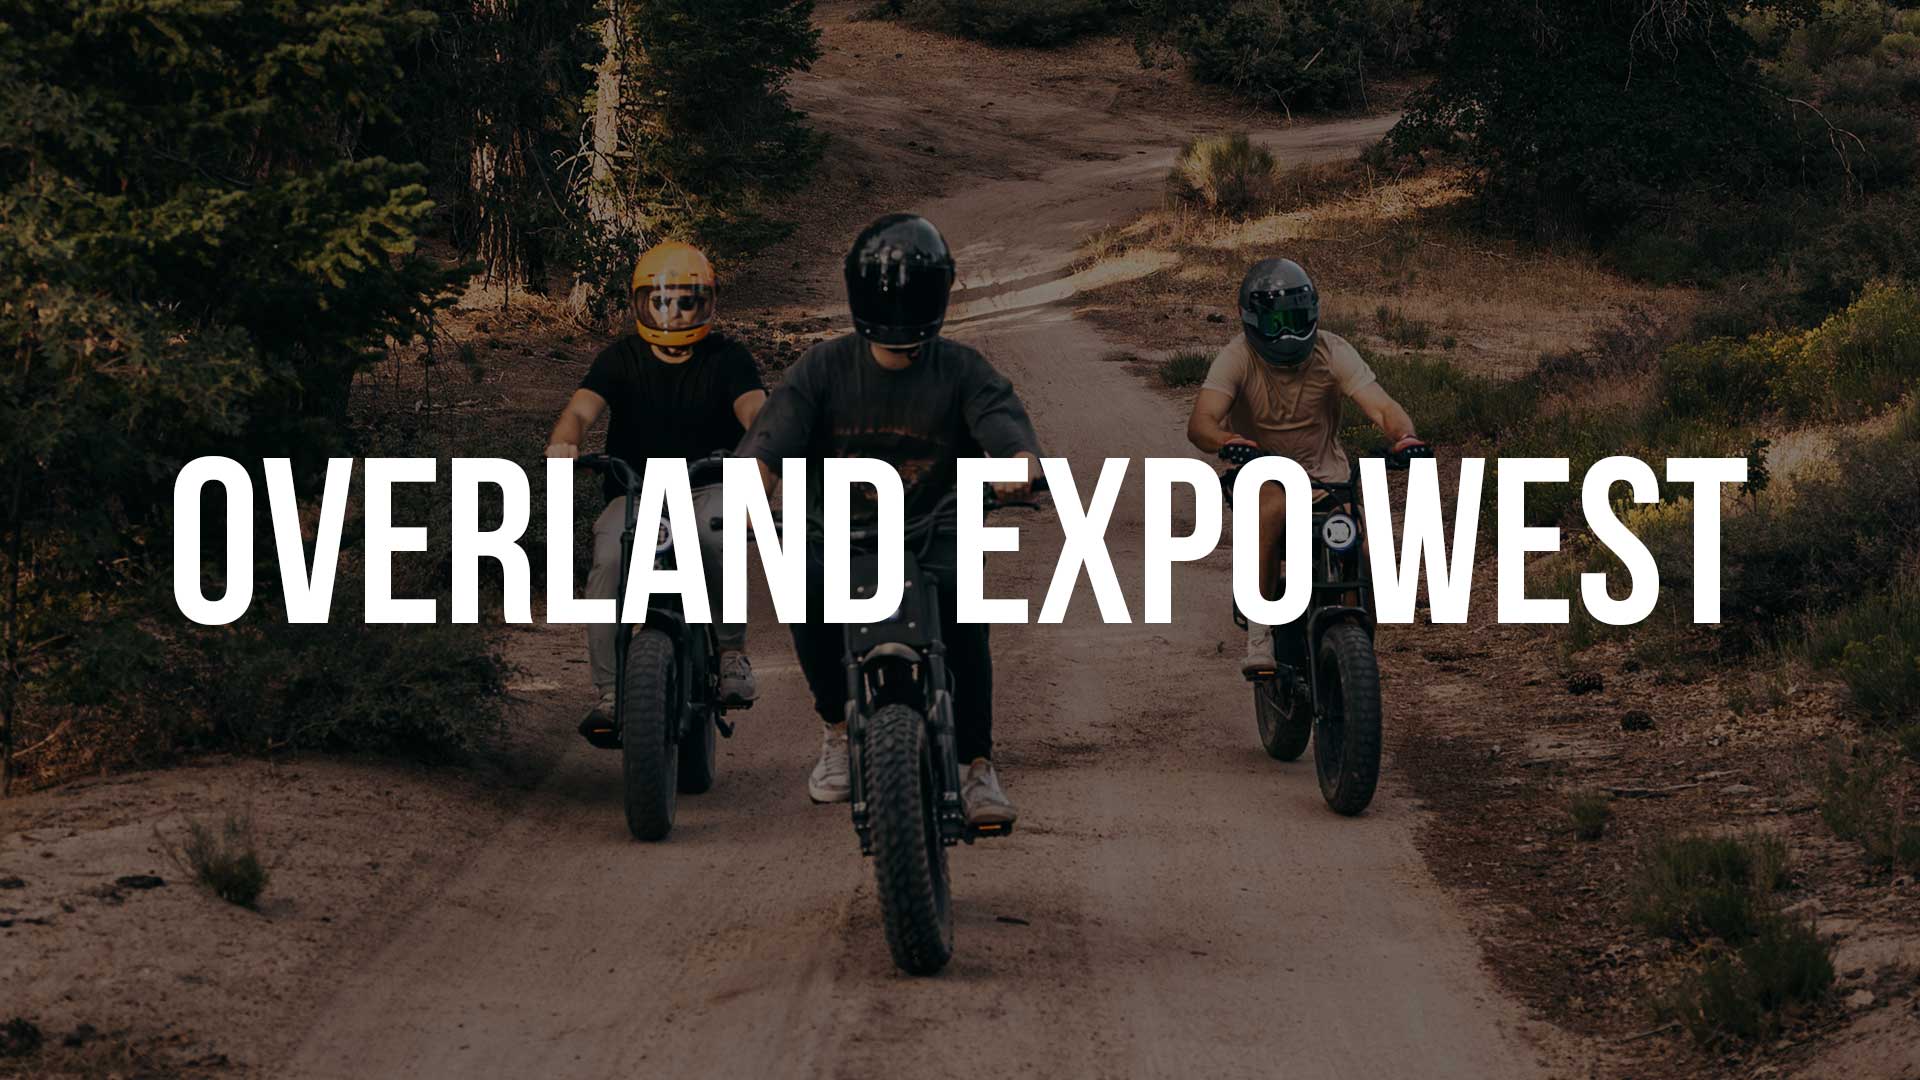 Graphic of ebike riders in the background with text overlaid as OVERLAND EXPO WEST